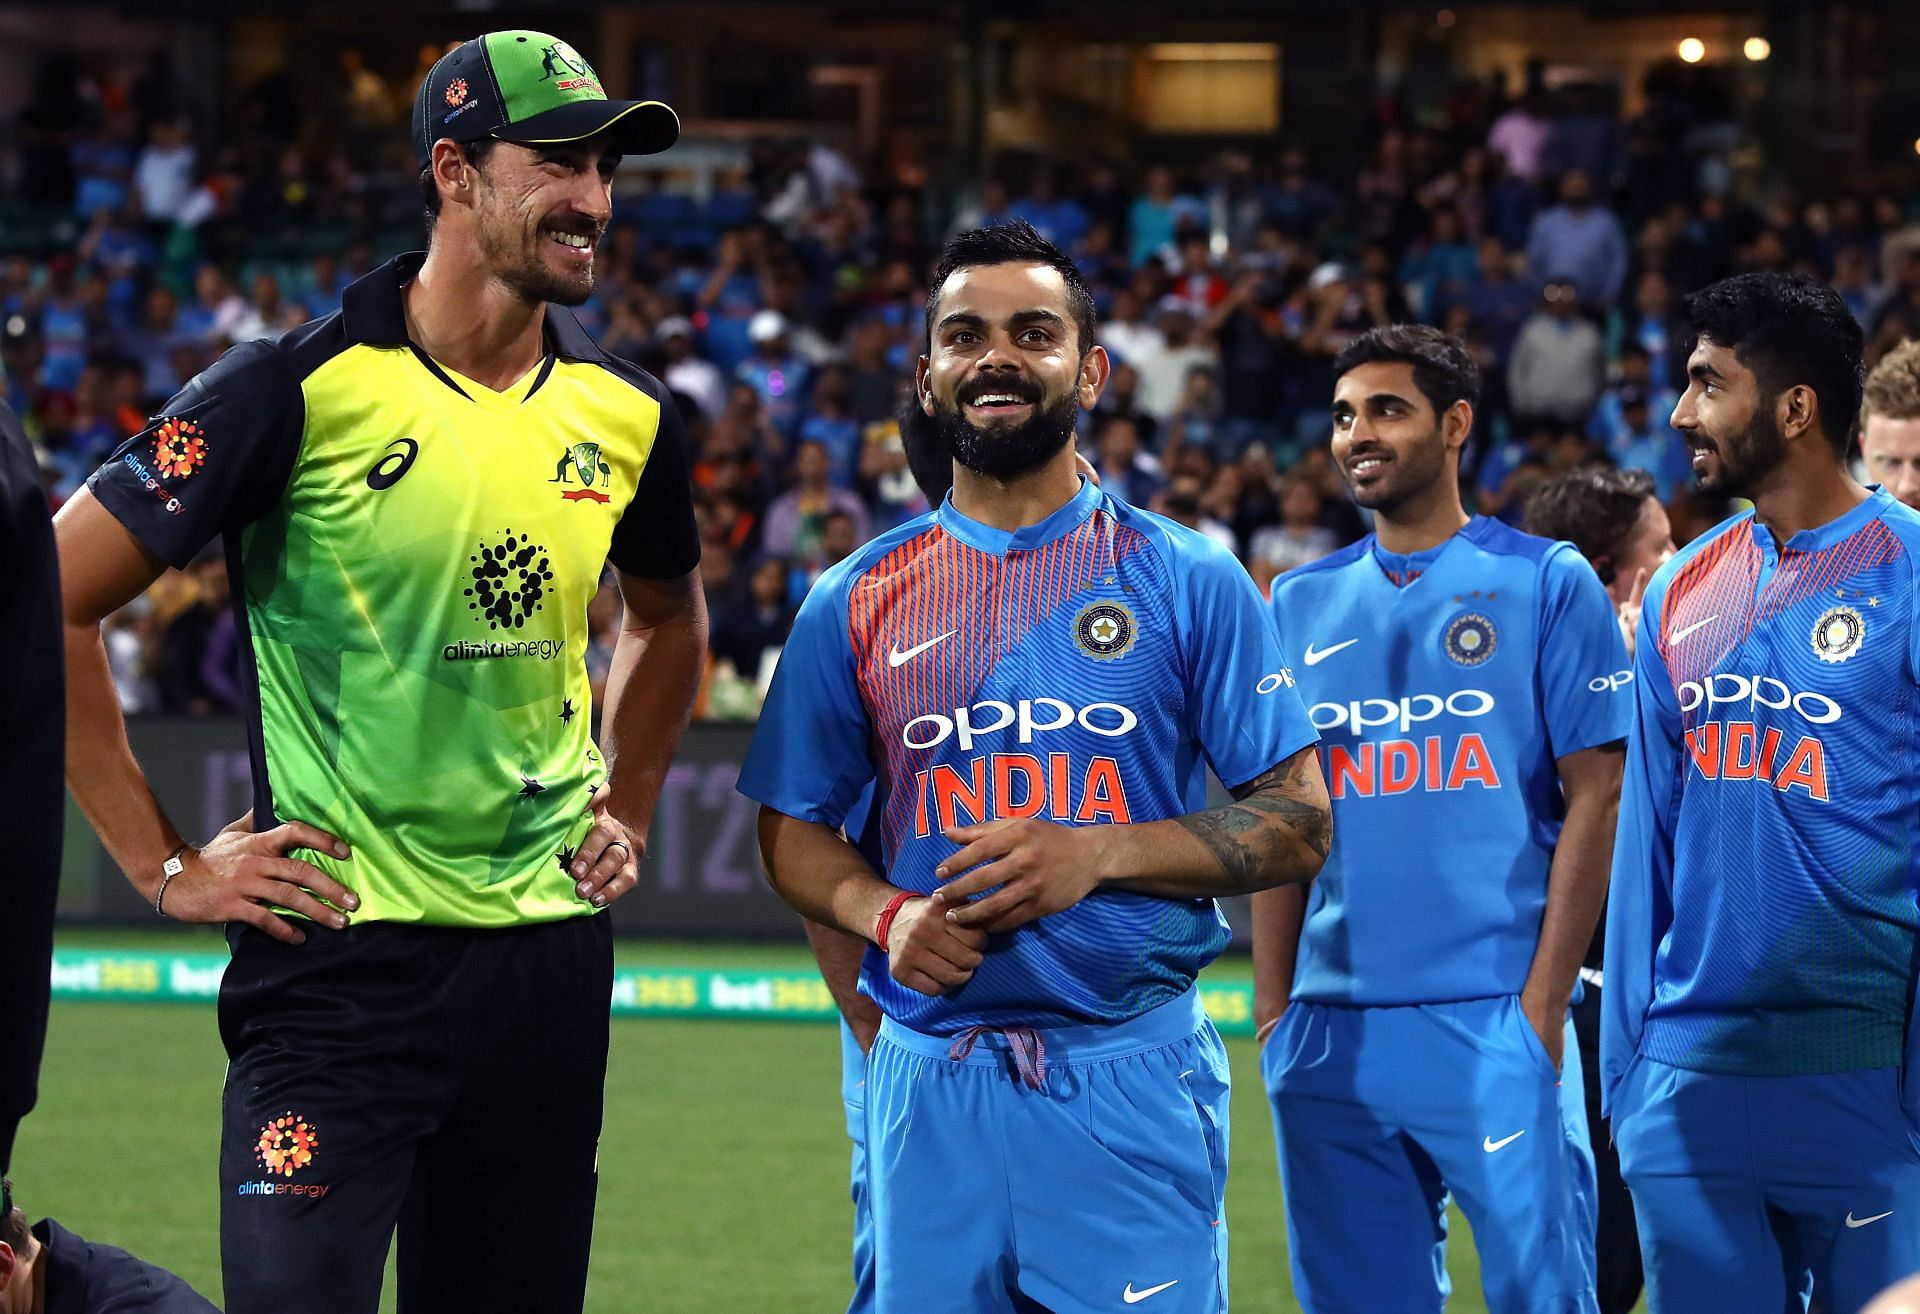 Aakash Chopra highlighted that both India and Australia have potent fast bowlers